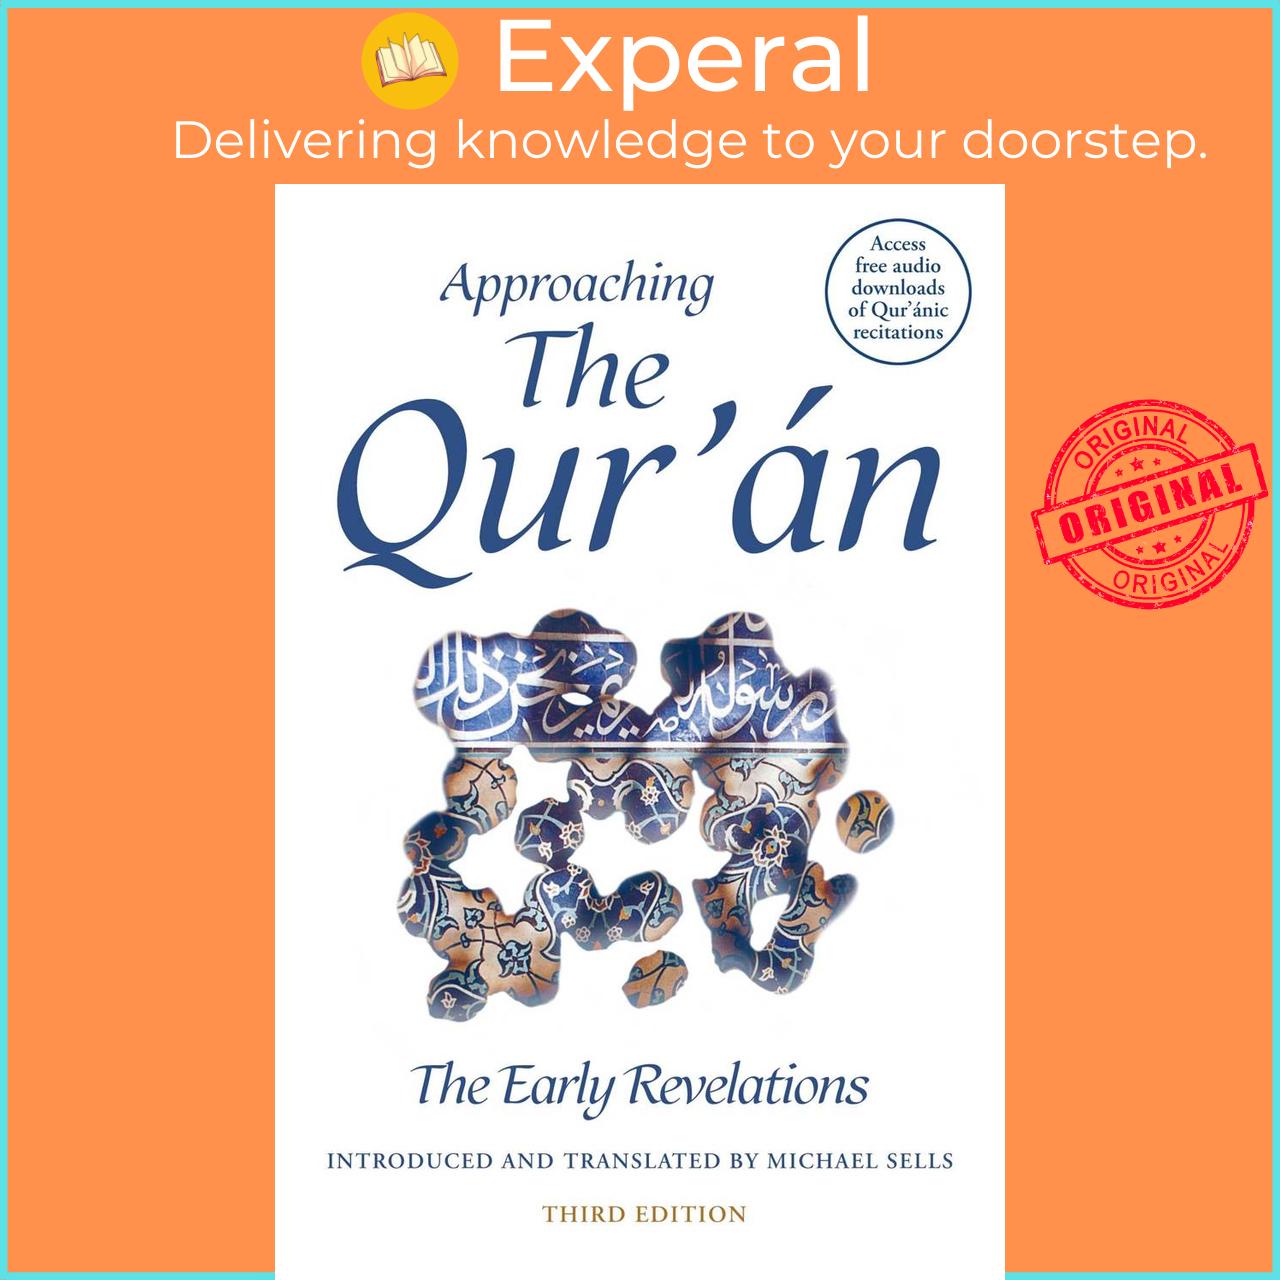 Sách - Approaching the Qur'an - The Early Revelations (third edition) by Michael Sells (US edition, paperback)